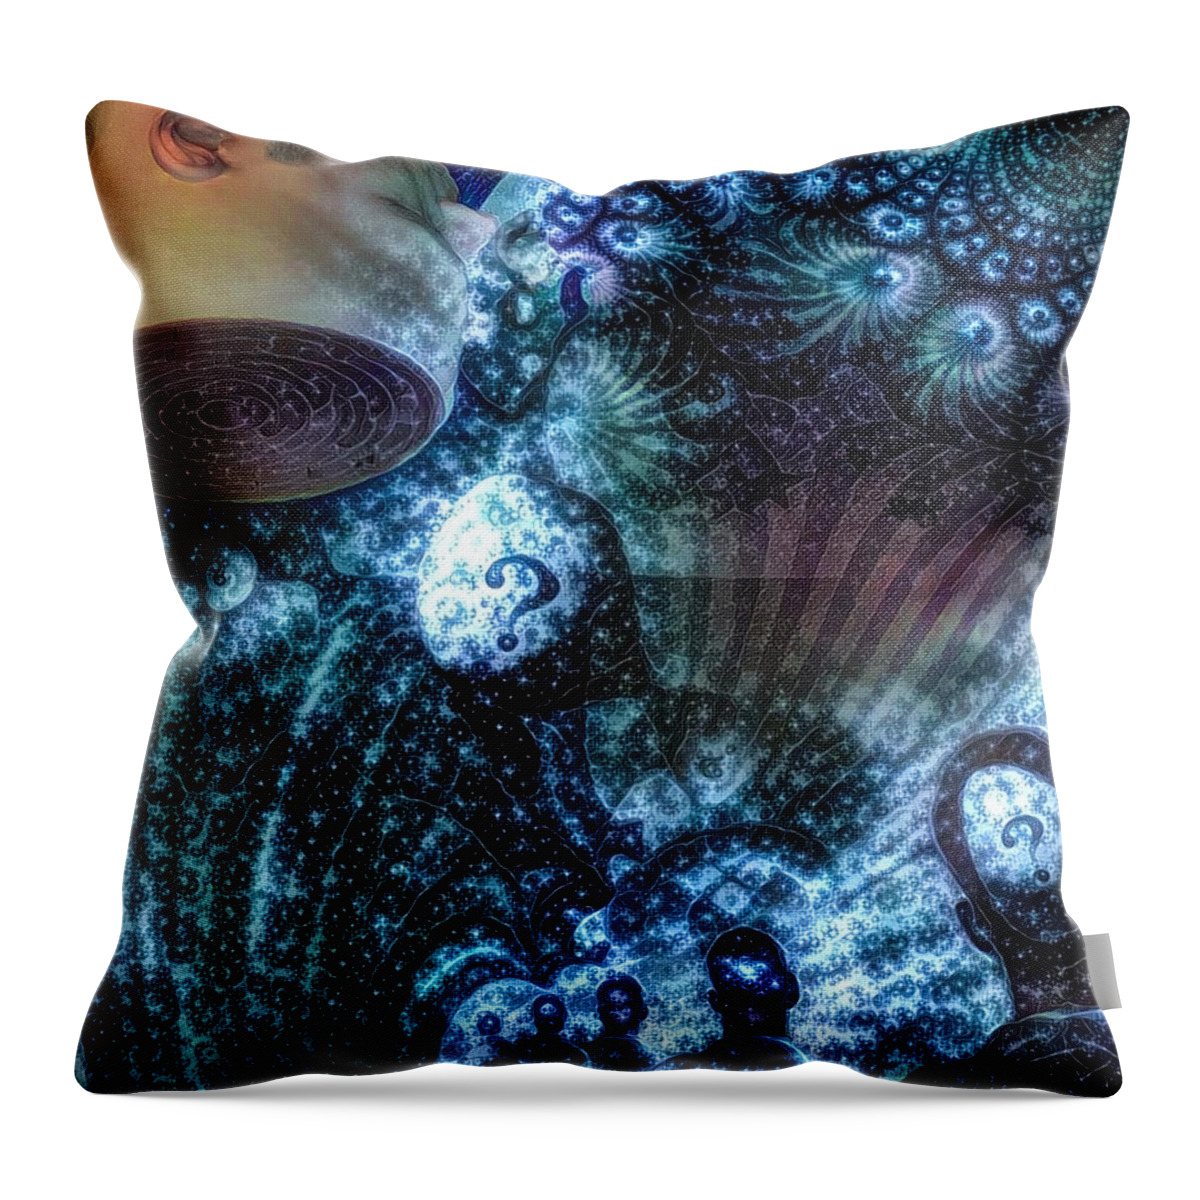 Abstract Throw Pillow featuring the digital art The mind by Bruce Rolff